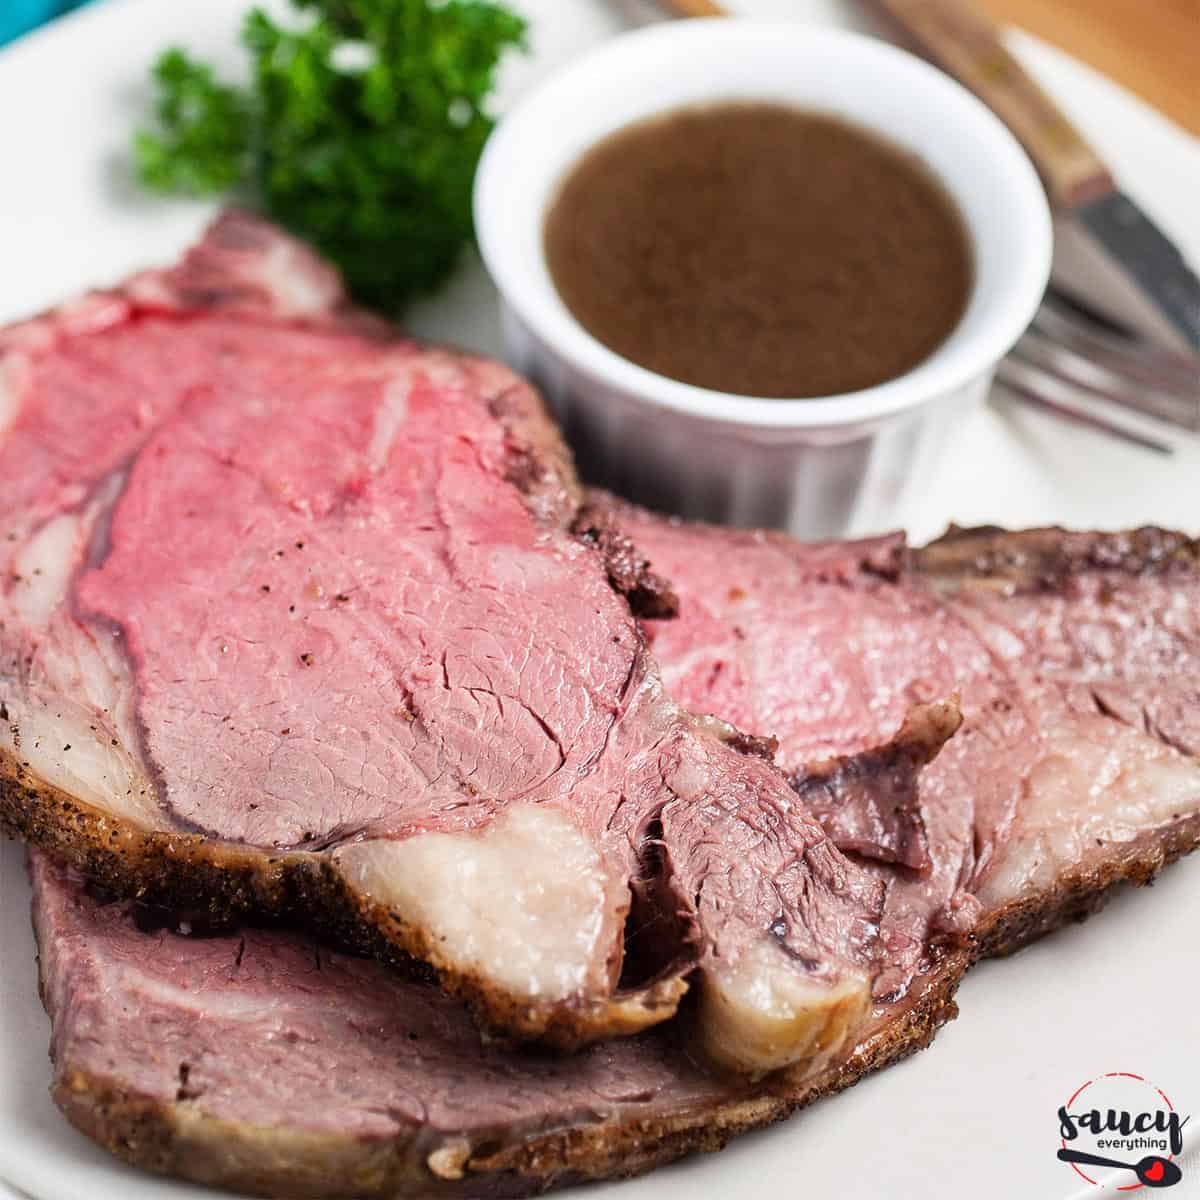 au jus sauce in a bowl next to two slices of prime rib